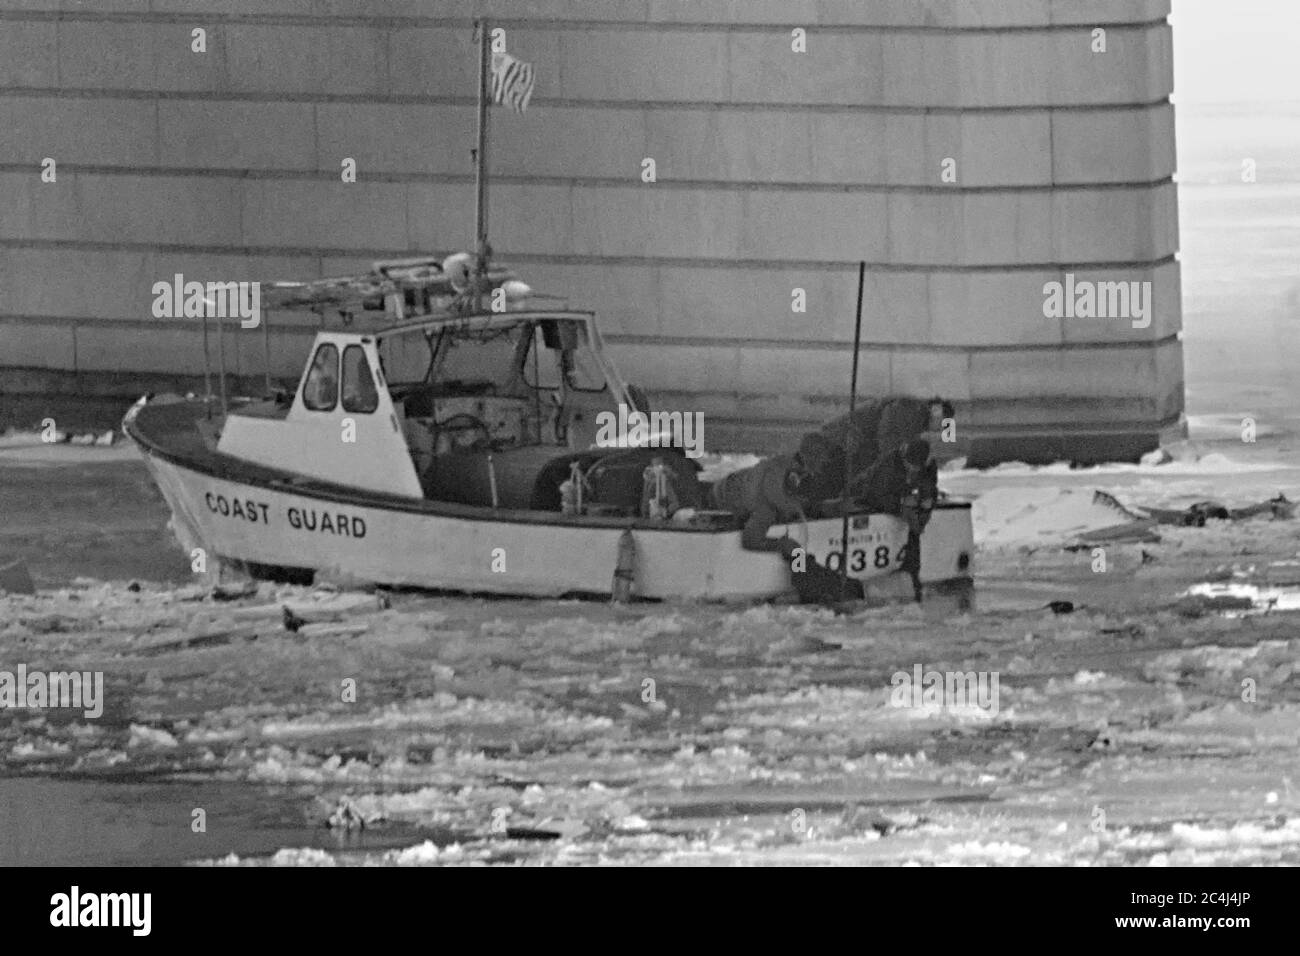 U.S. Coast Guard search and rescue teams recovery the body of a victim of the Air Florida Flight 90 crash from the frozen waters of the Potomac River January 14, 1982 in Washington, D.C. The U.S. domestic passenger flight crashed into the river after colliding with the 14th Street Bridge on January 13, 1982 killing 74 people. Stock Photo